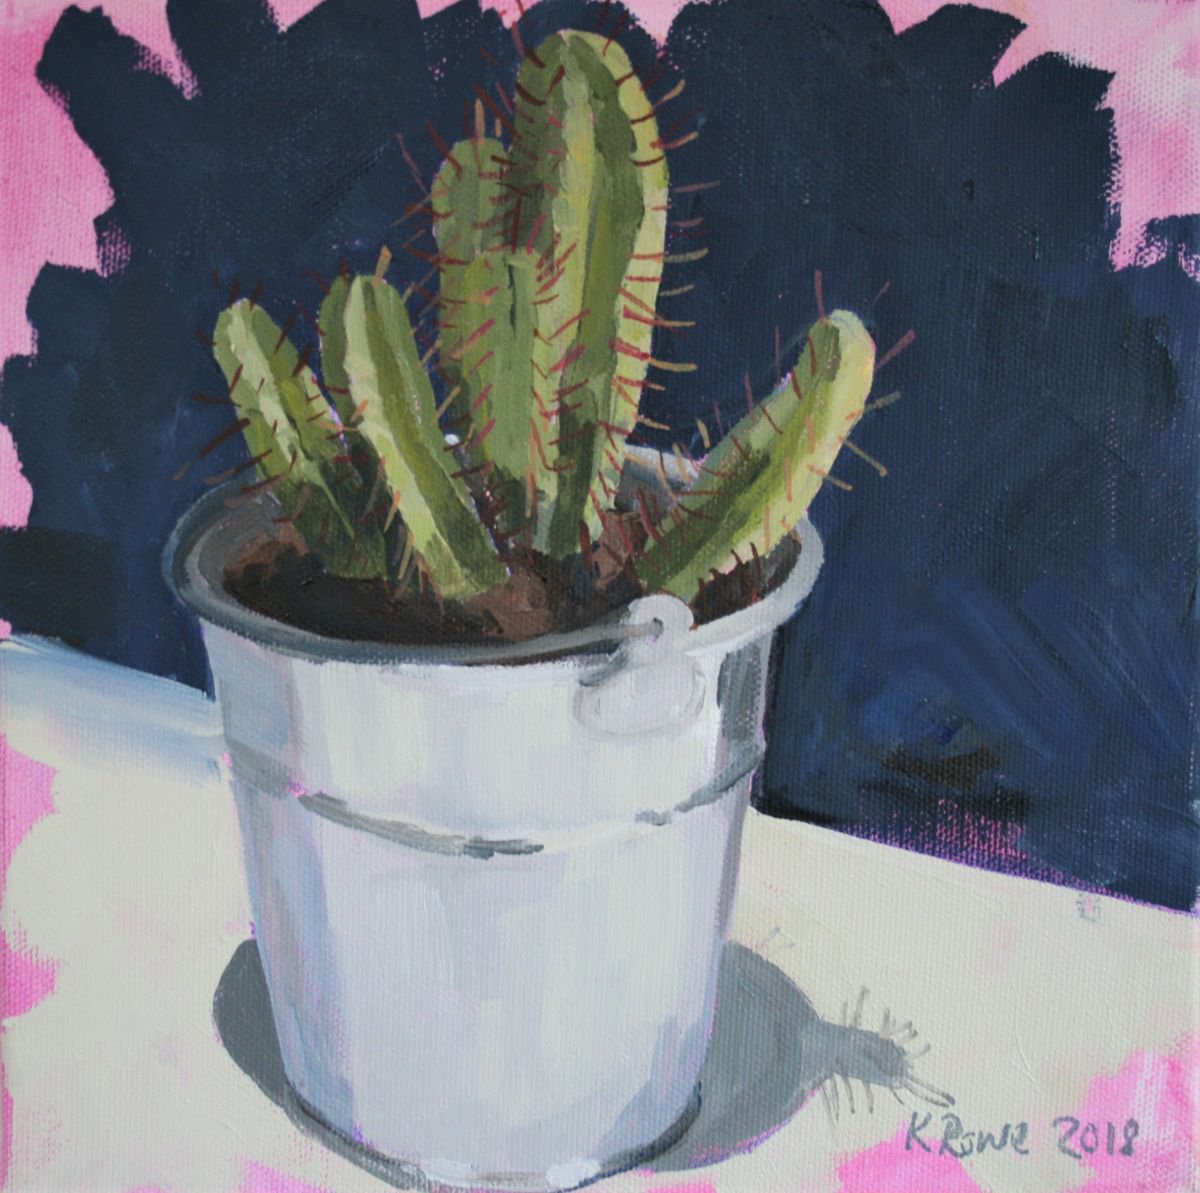 Small cactus on pink ground by Katharine Rowe